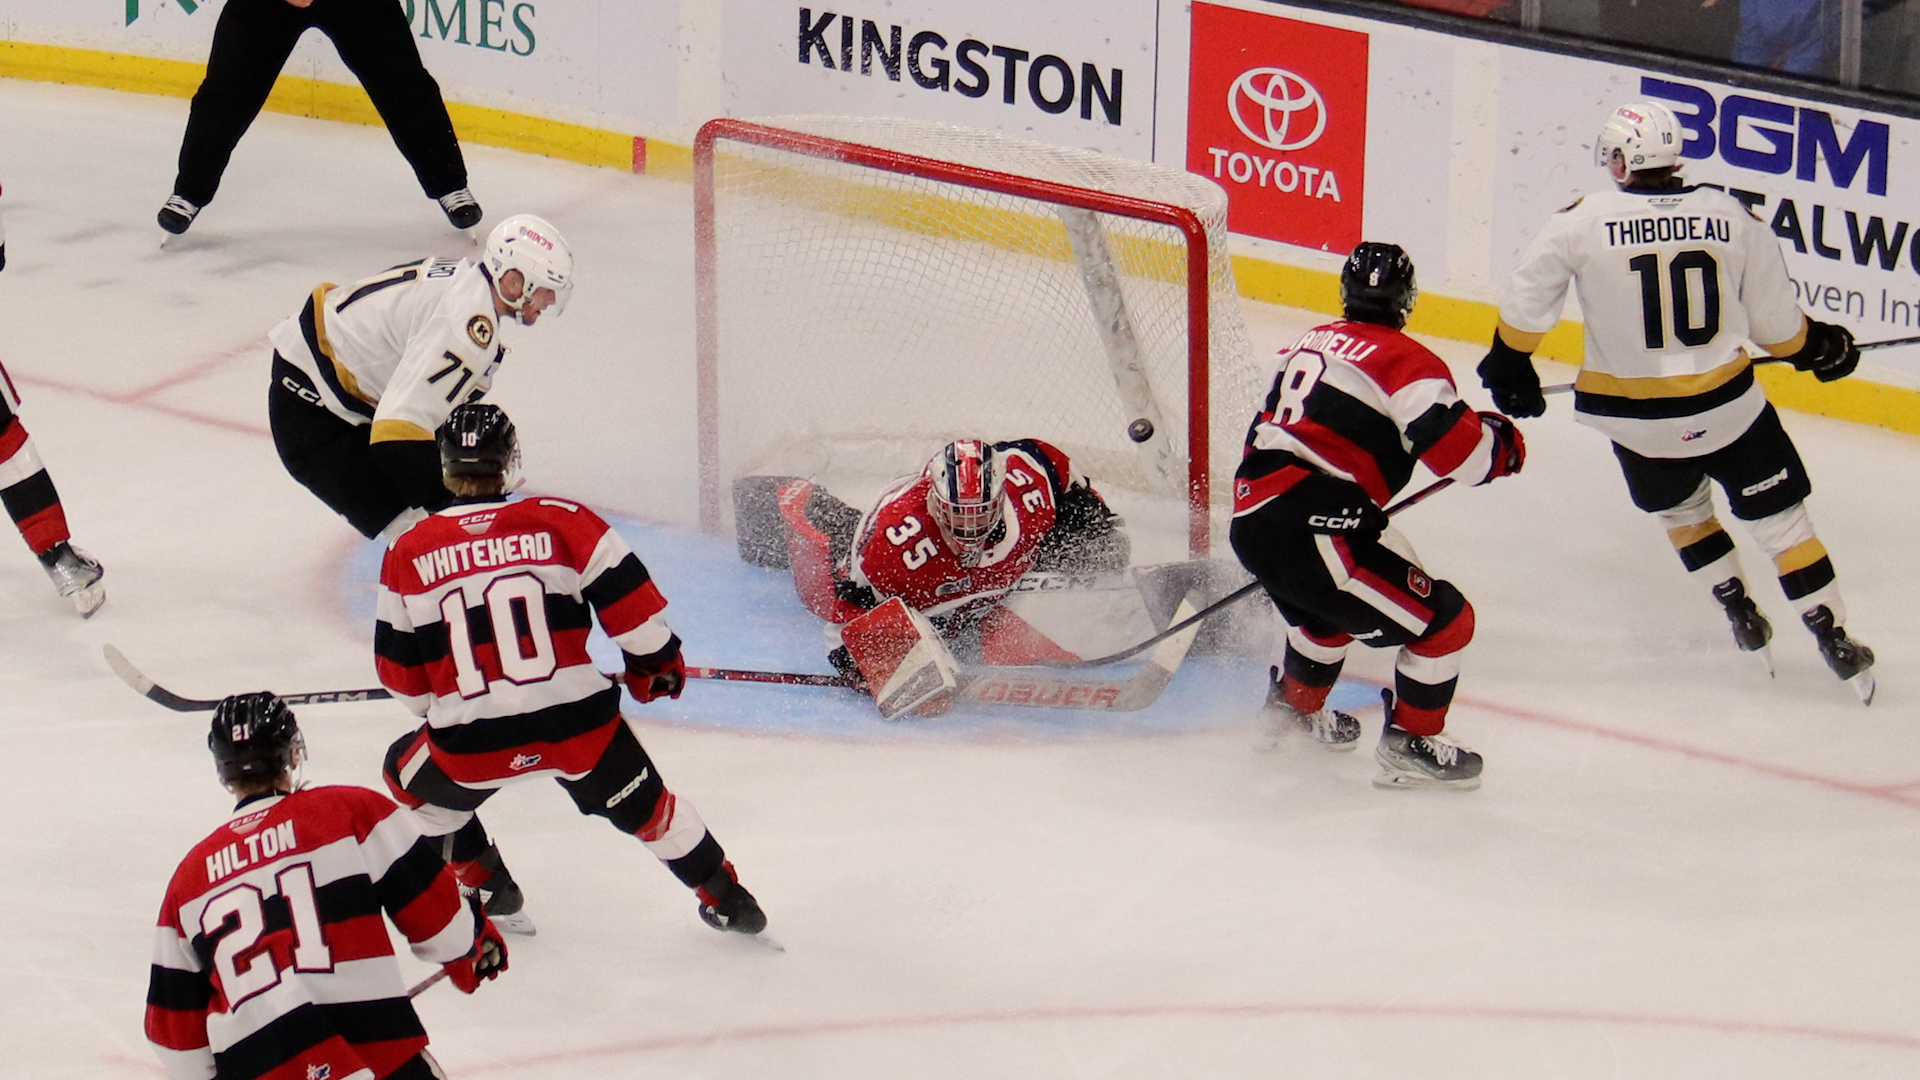 Frontenacs’ late surge secures 5-2 win over Ottawa